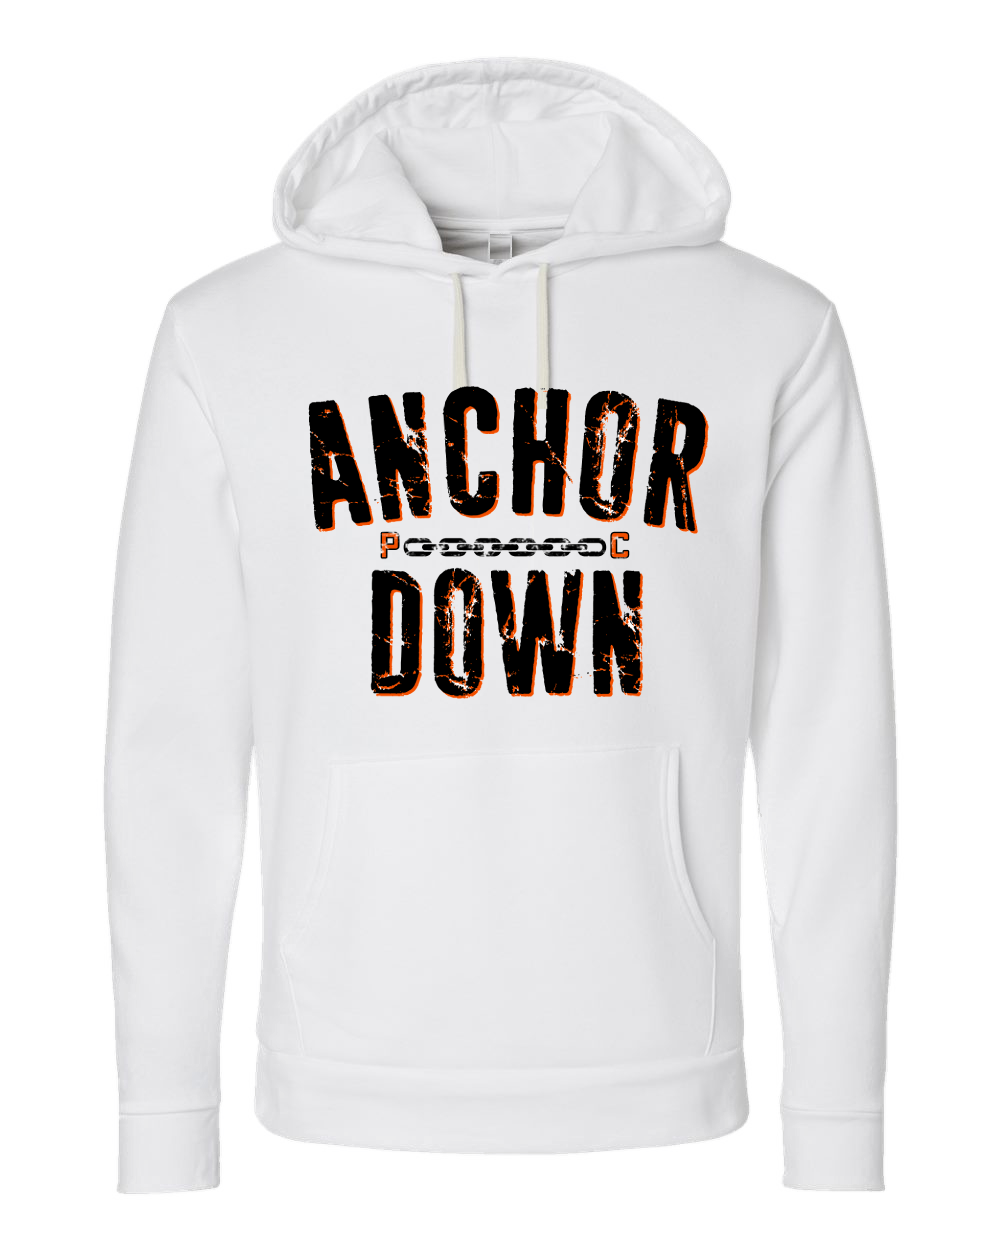 Anchor Down Hoodie (Adult)